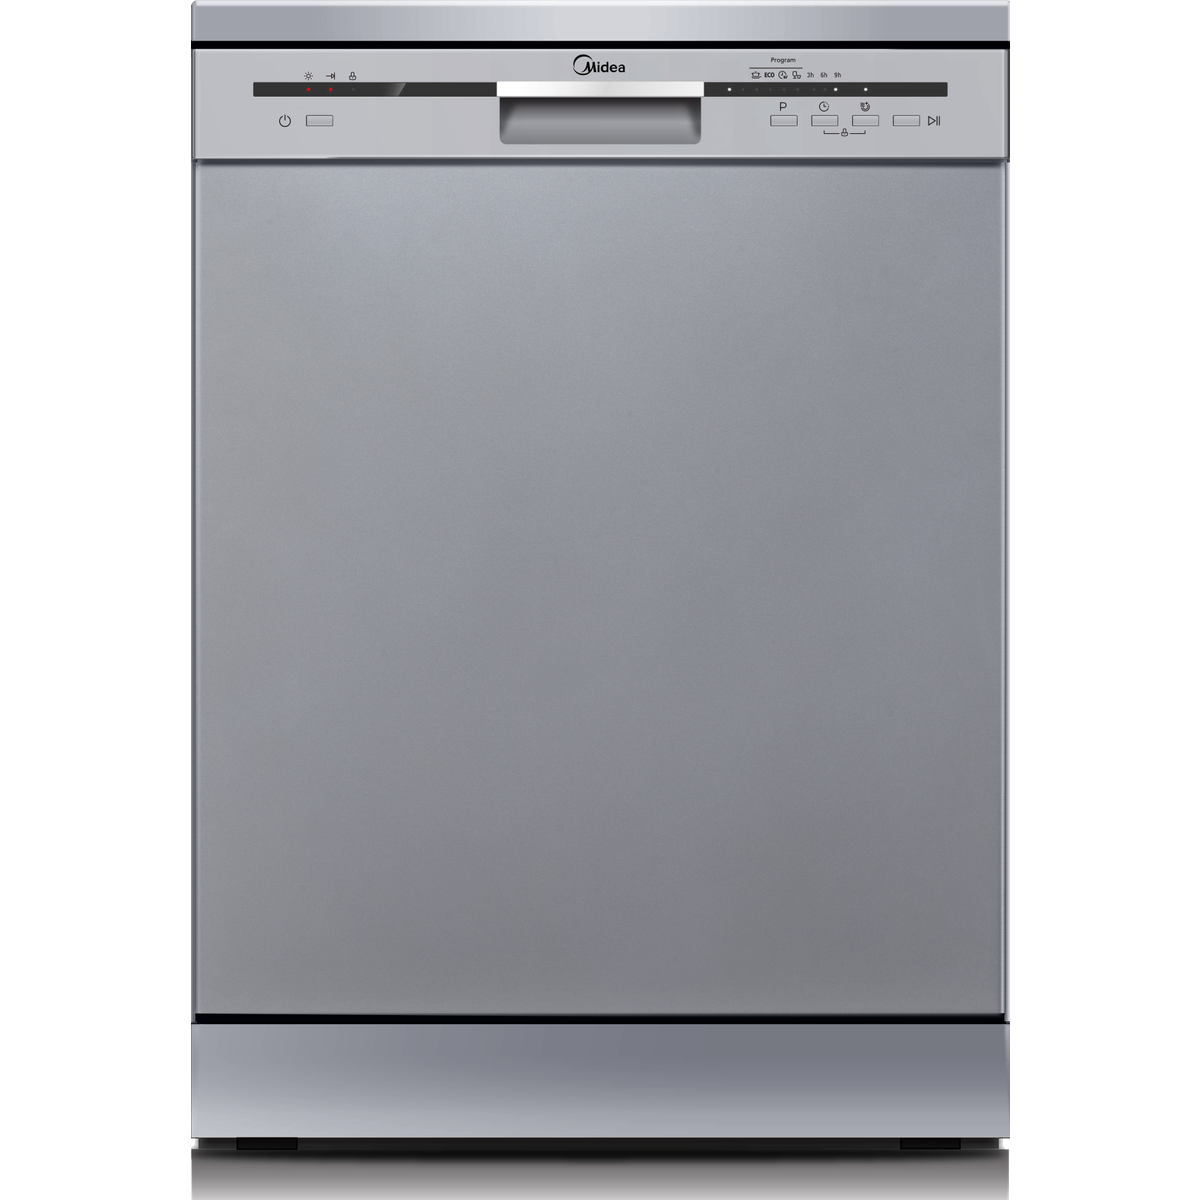 Midea 13 Place Dishwasher - Stainless Steel Buy Online in Zimbabwe thedailysale.shop